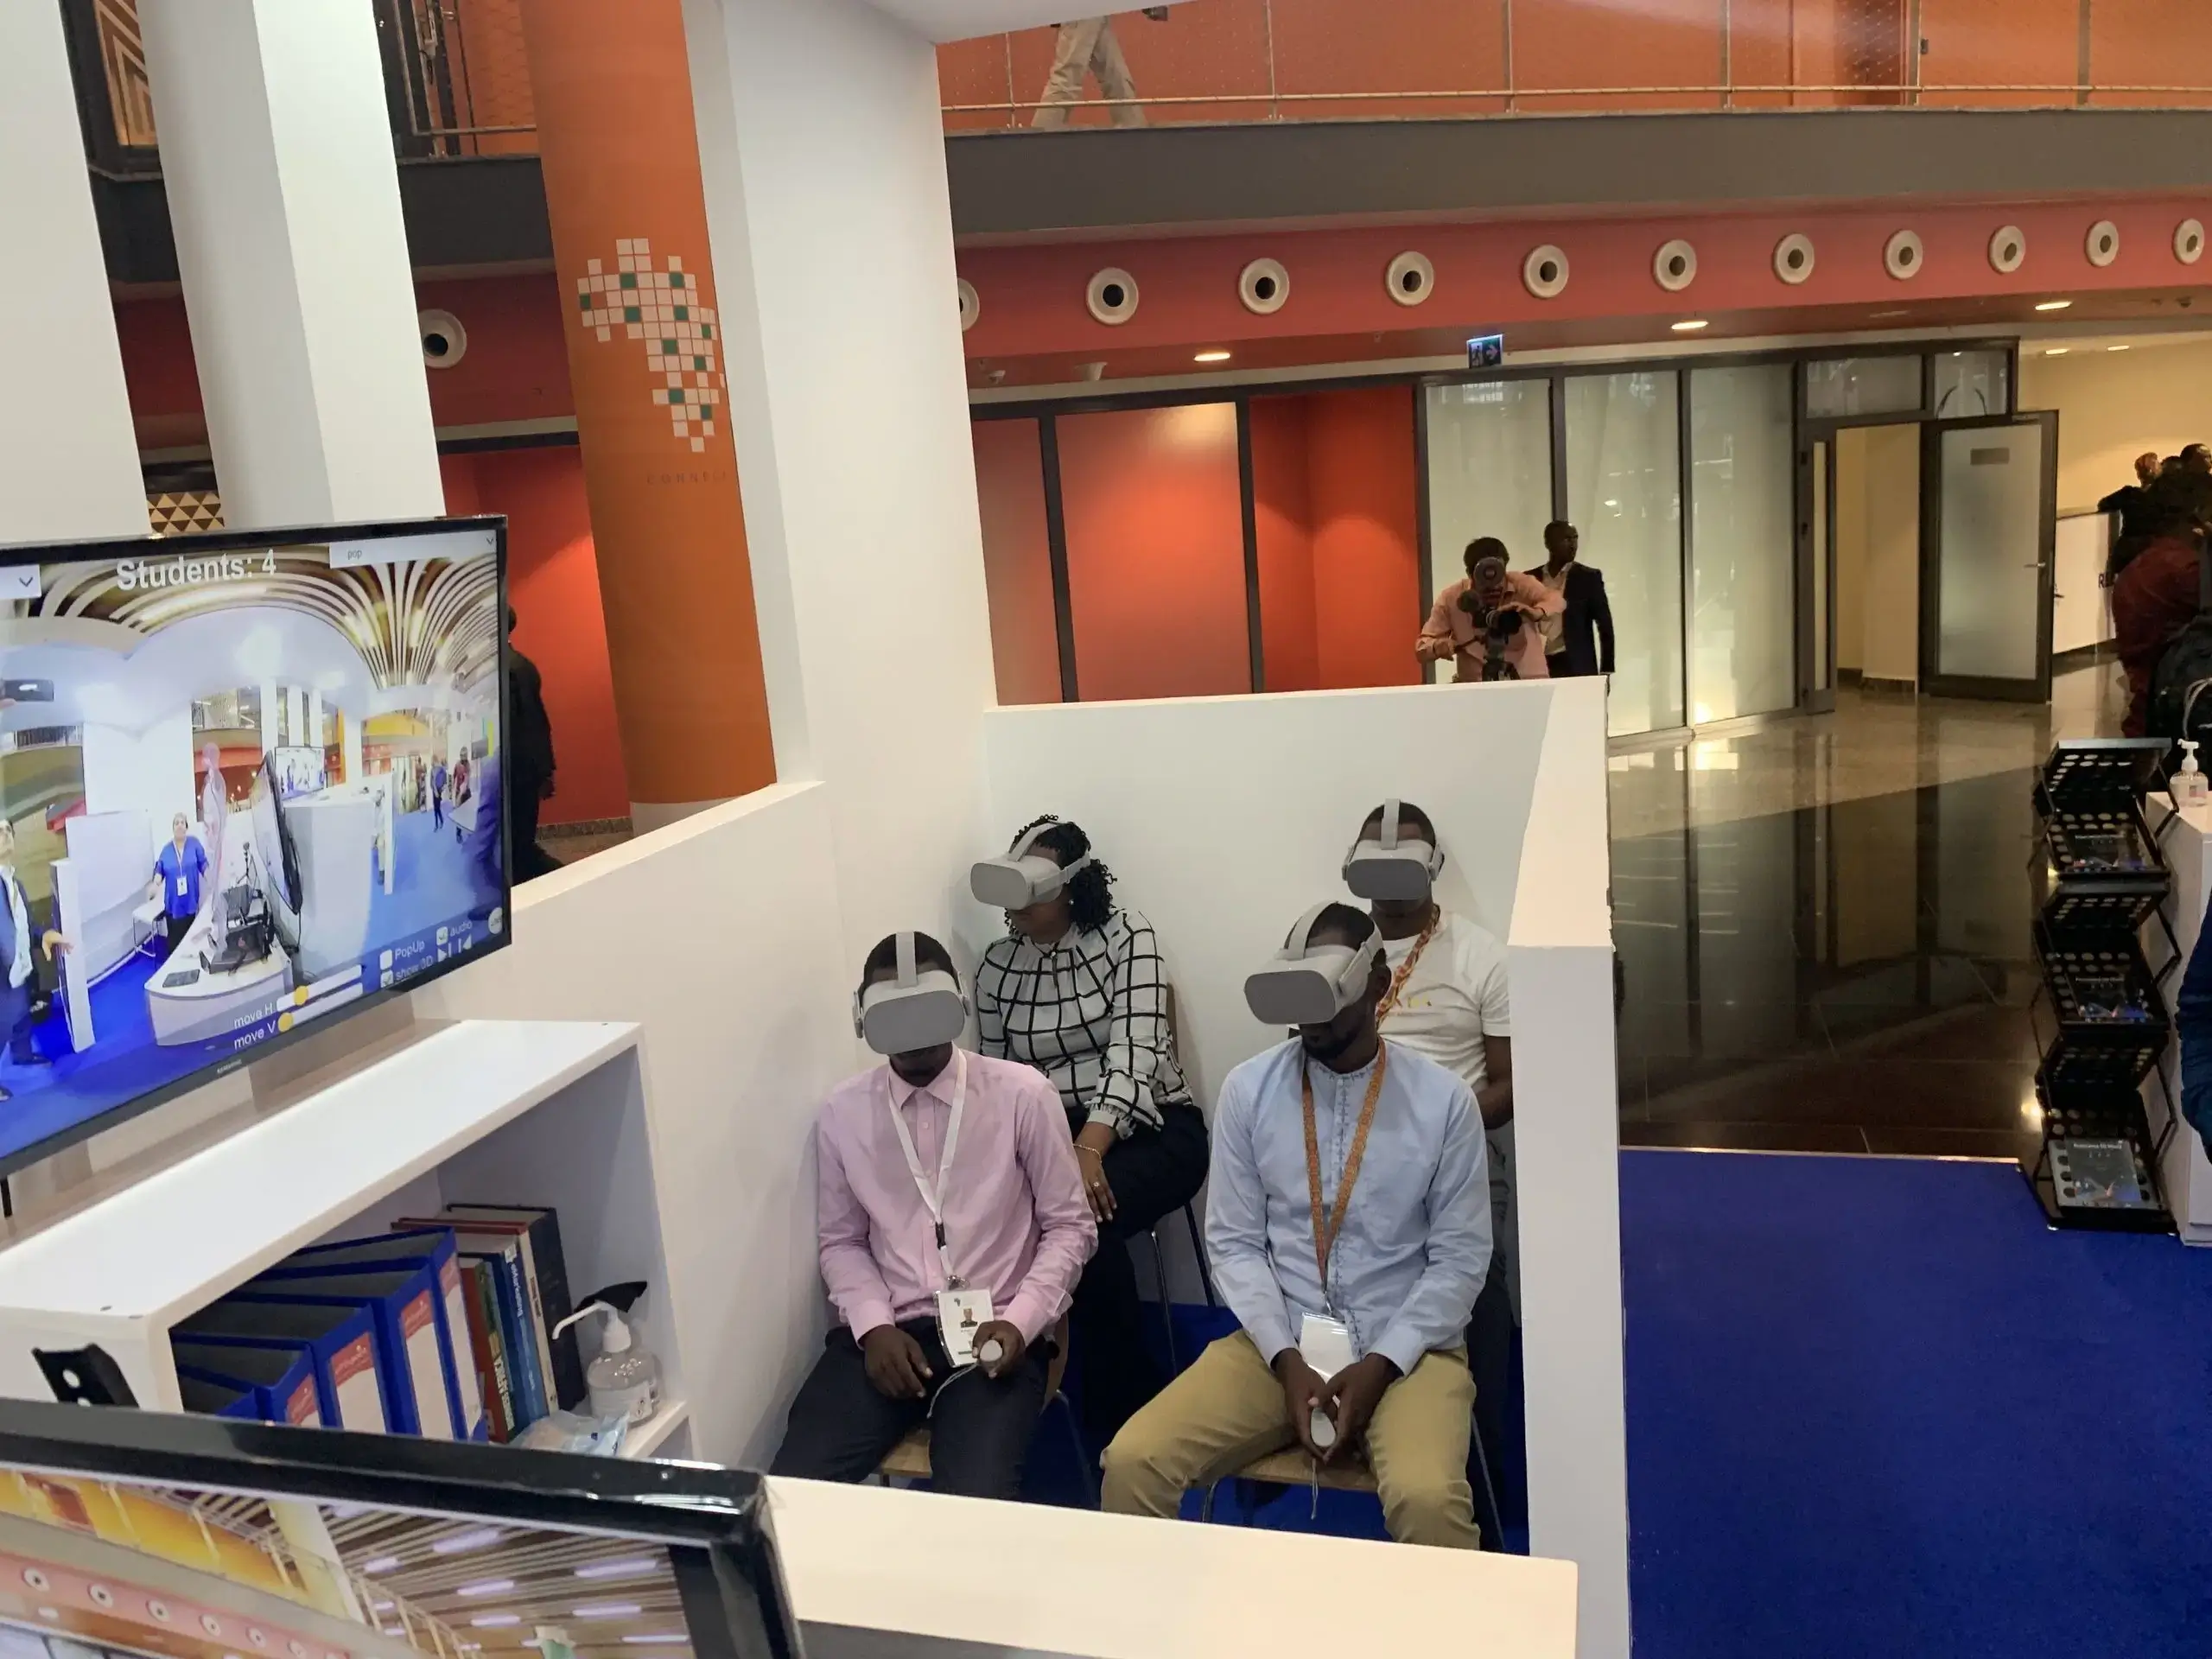 Group of 4 people with Vr headsets in a small room